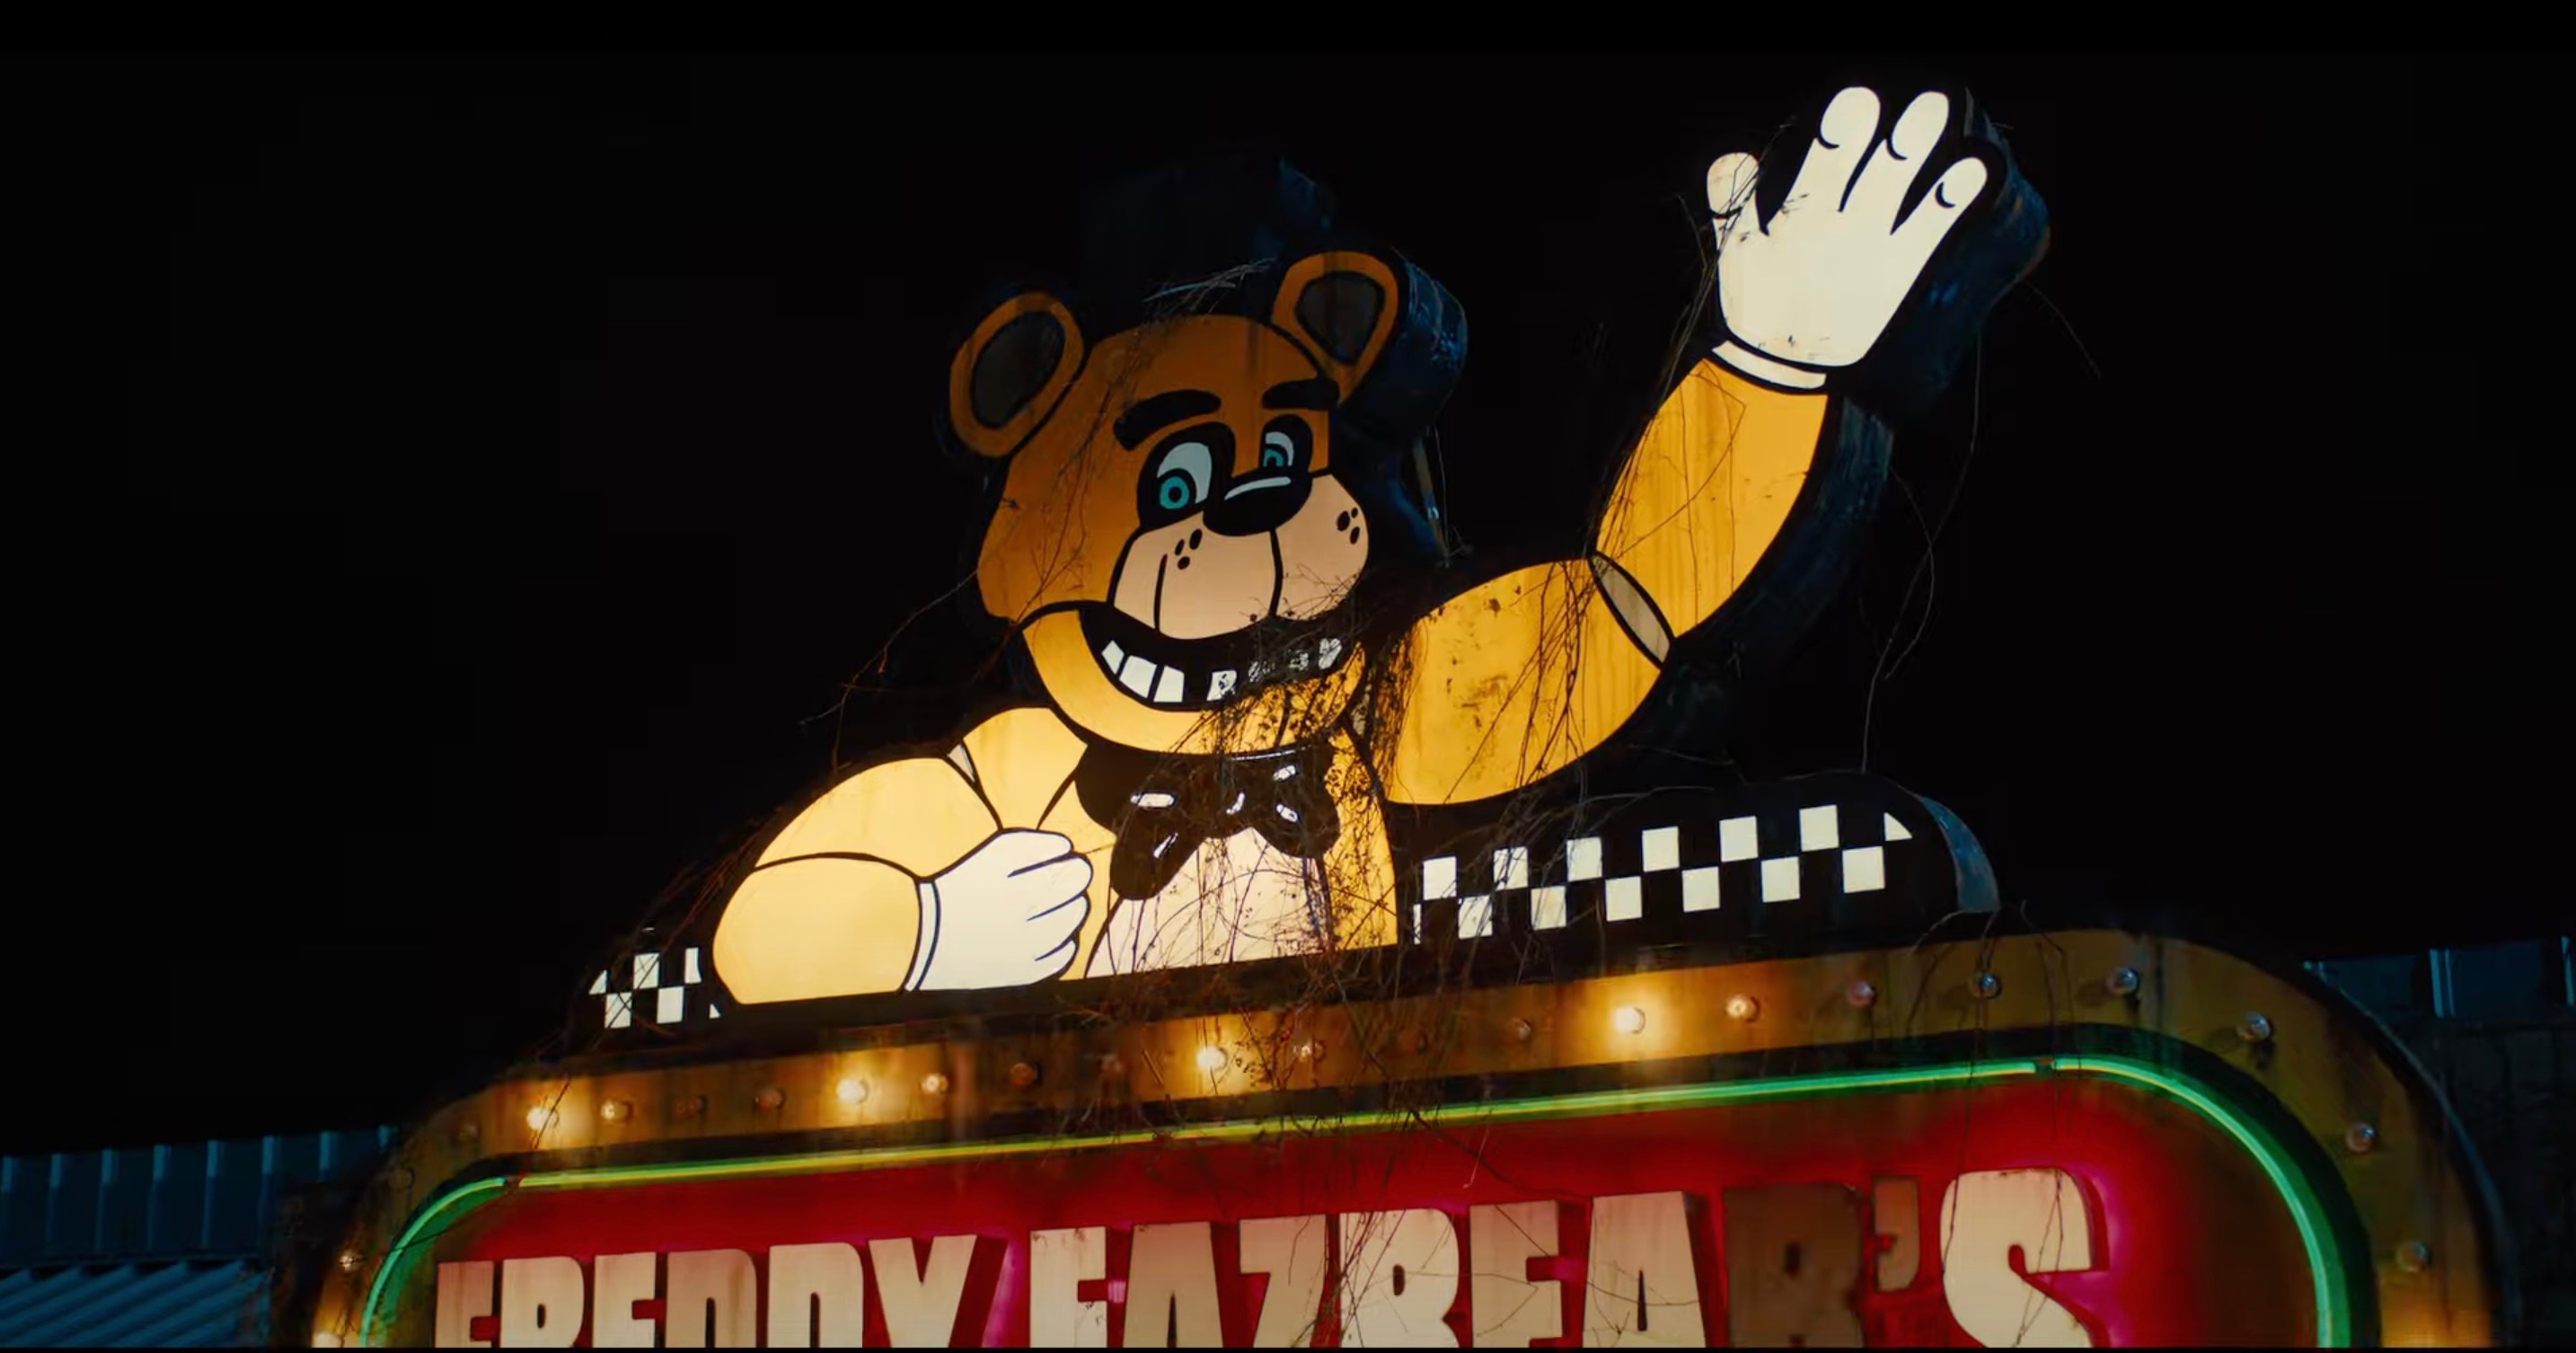 Is The Puppet Actually in The Five Night's at Freddy's Movie